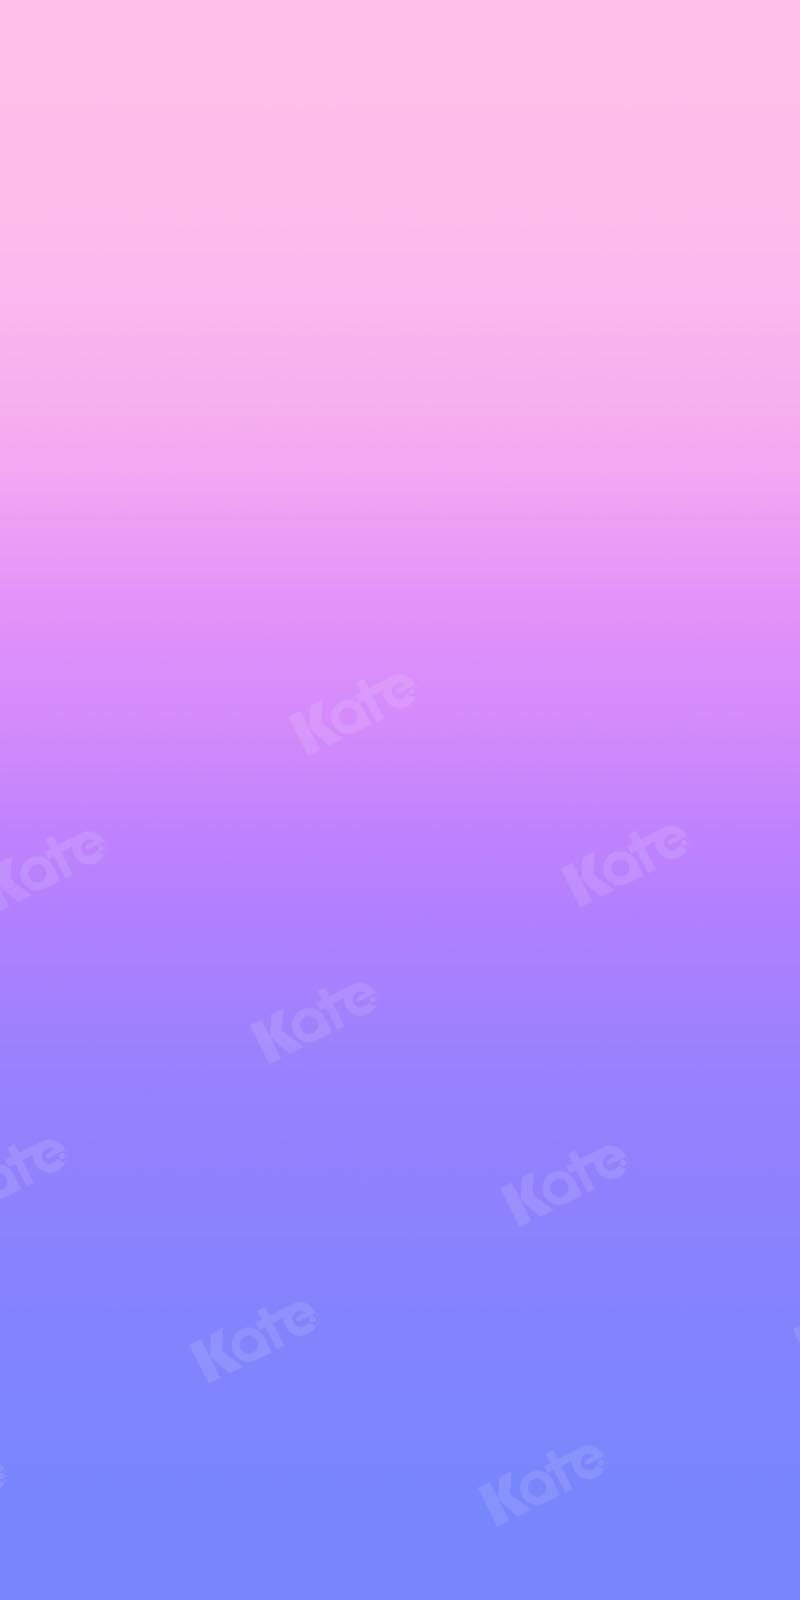 Kate Abstract Gradient Pink to Blue Backdrop Designed by Kate Image